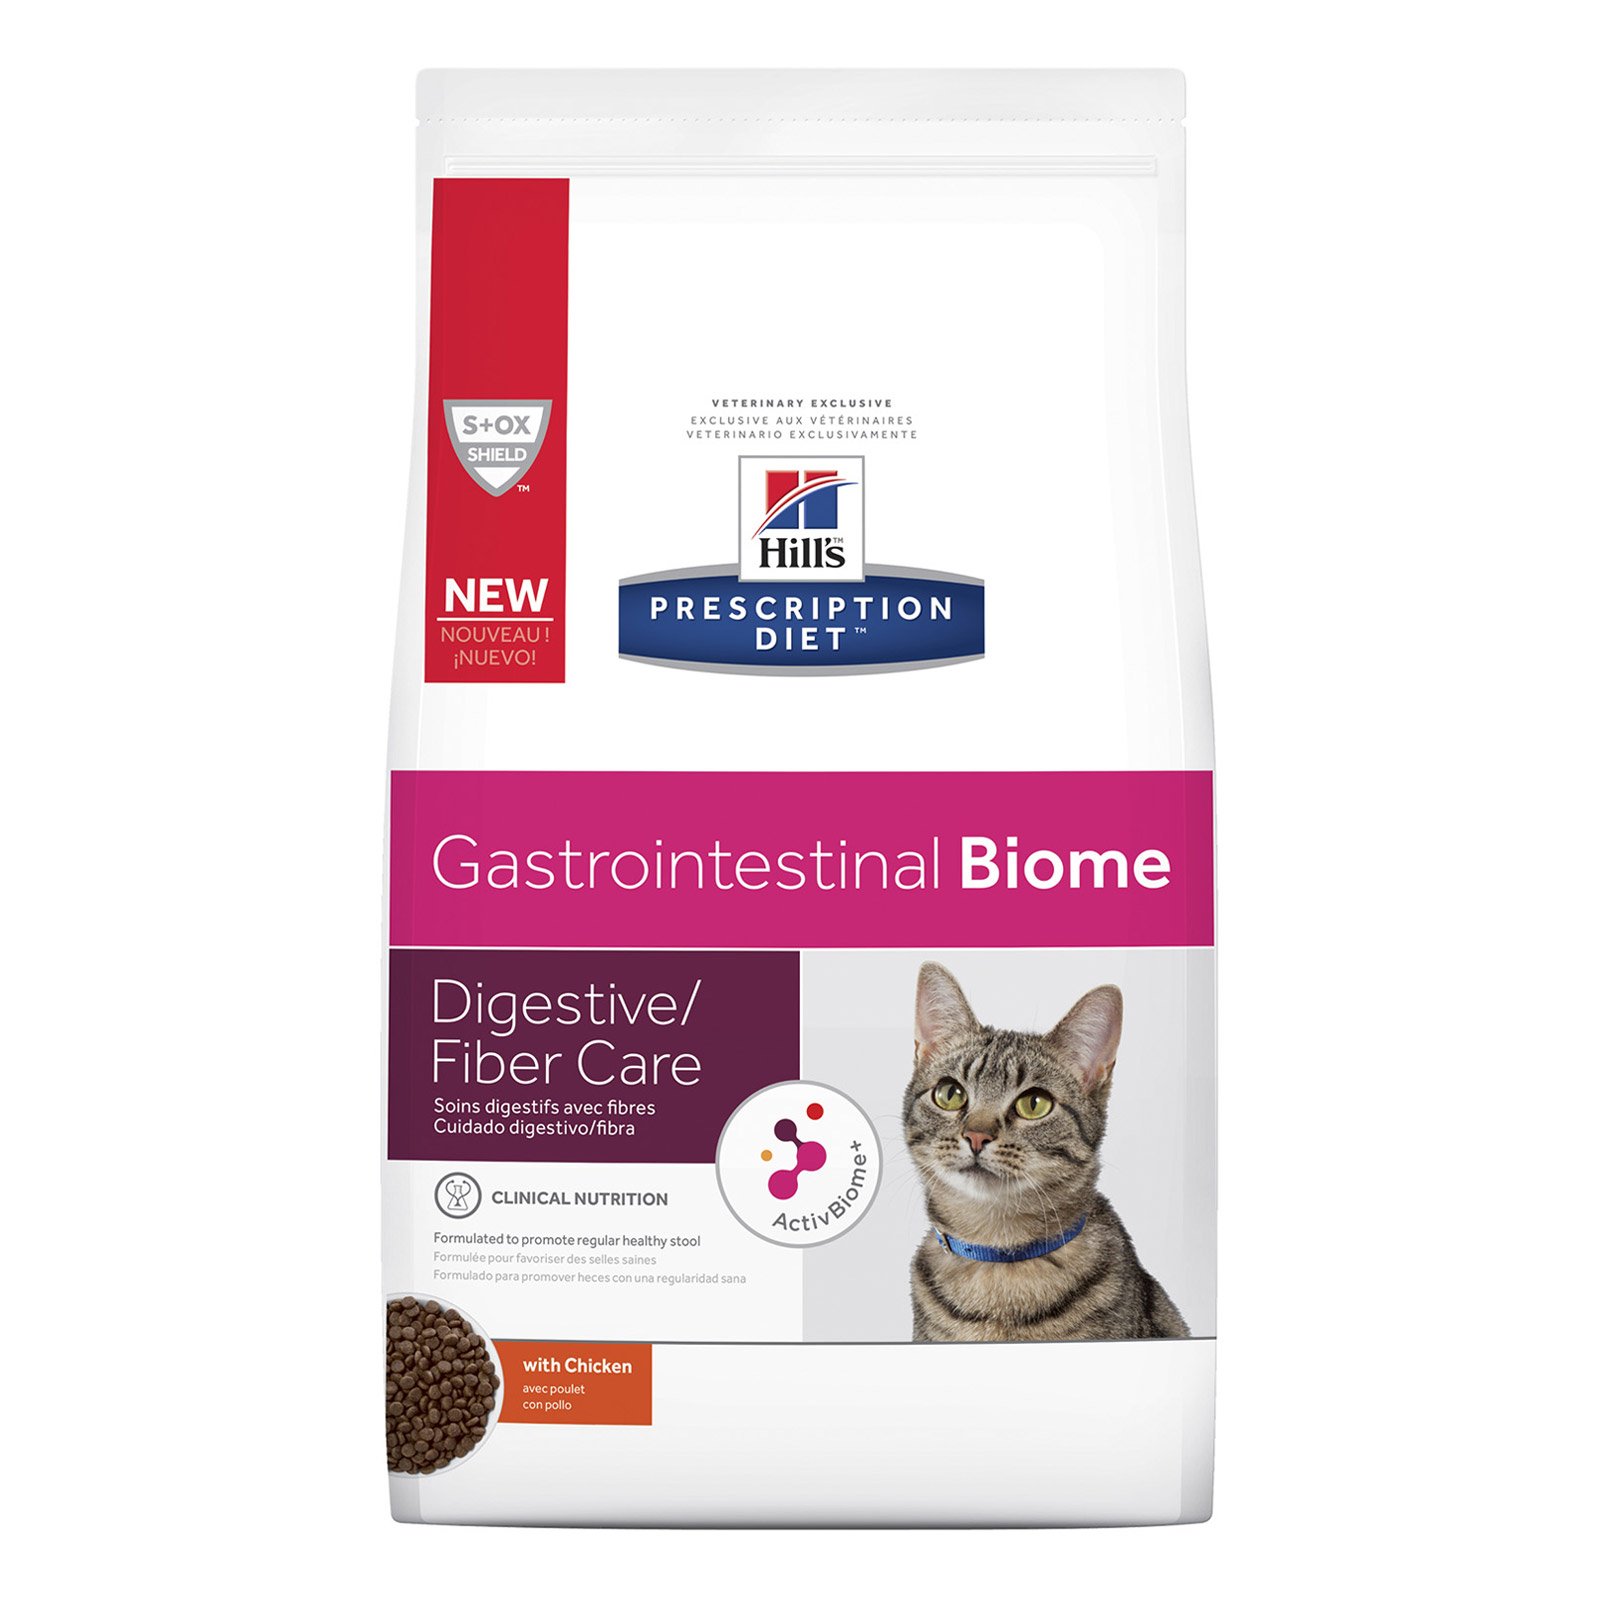 Hill's Prescription Diet Gastrointestinal Biome Digestive Fibre Care with Chicken Dry Cat Food  